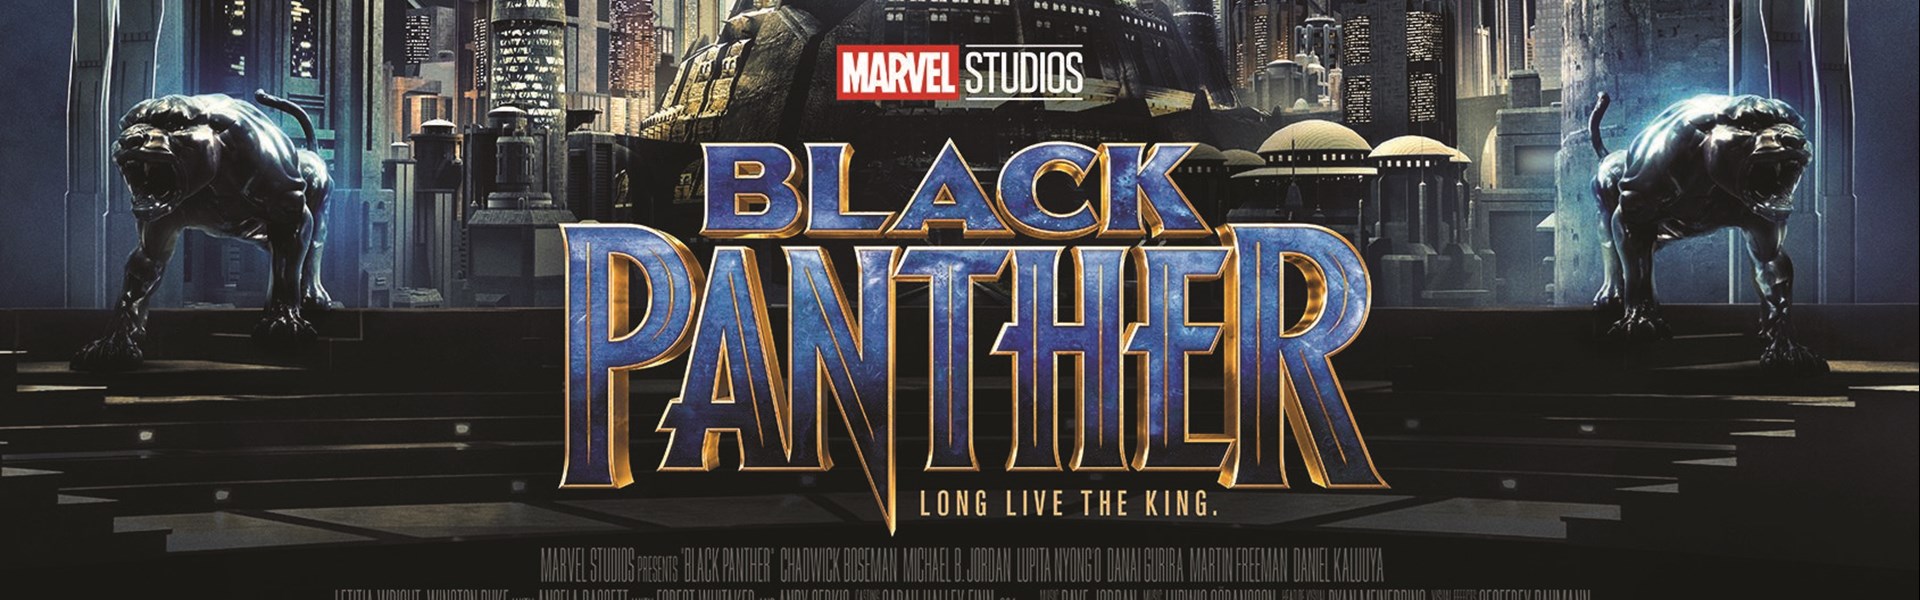 FILM: Black Panther (12A)